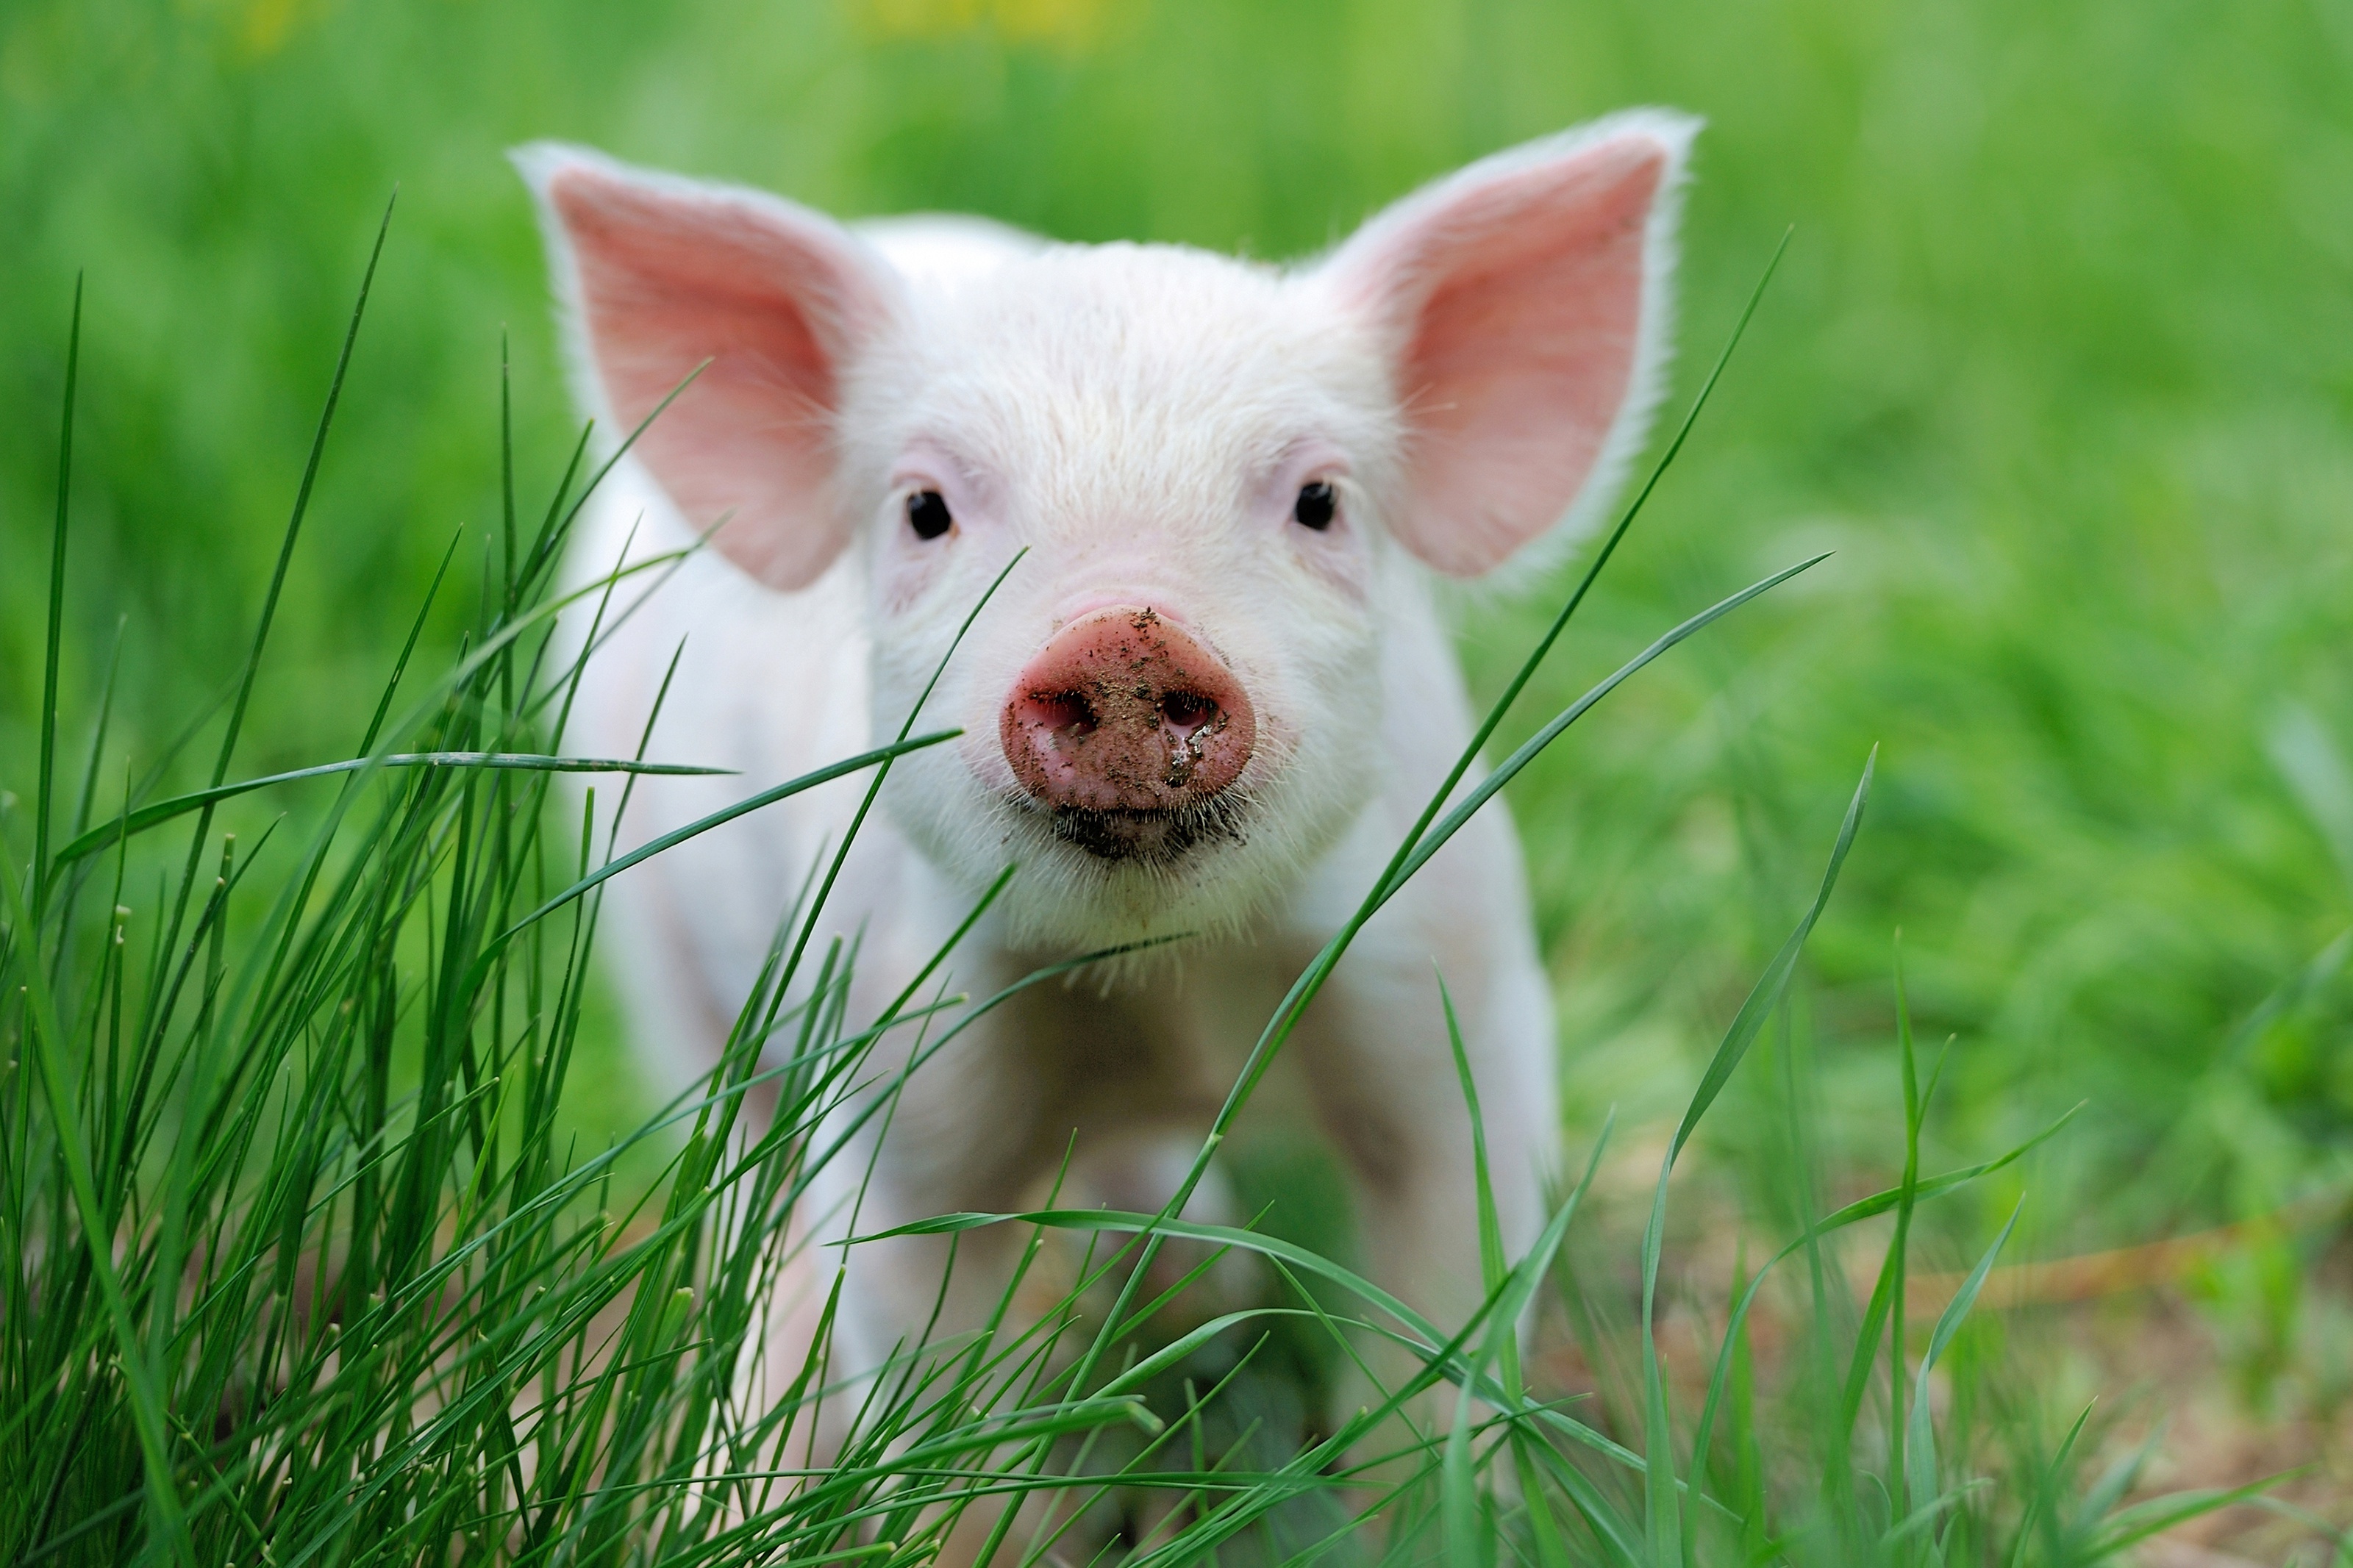 Curly-tailed pig, Playful piglets, Cute farm animals, Adorable pink pig, 3200x2140 HD Desktop